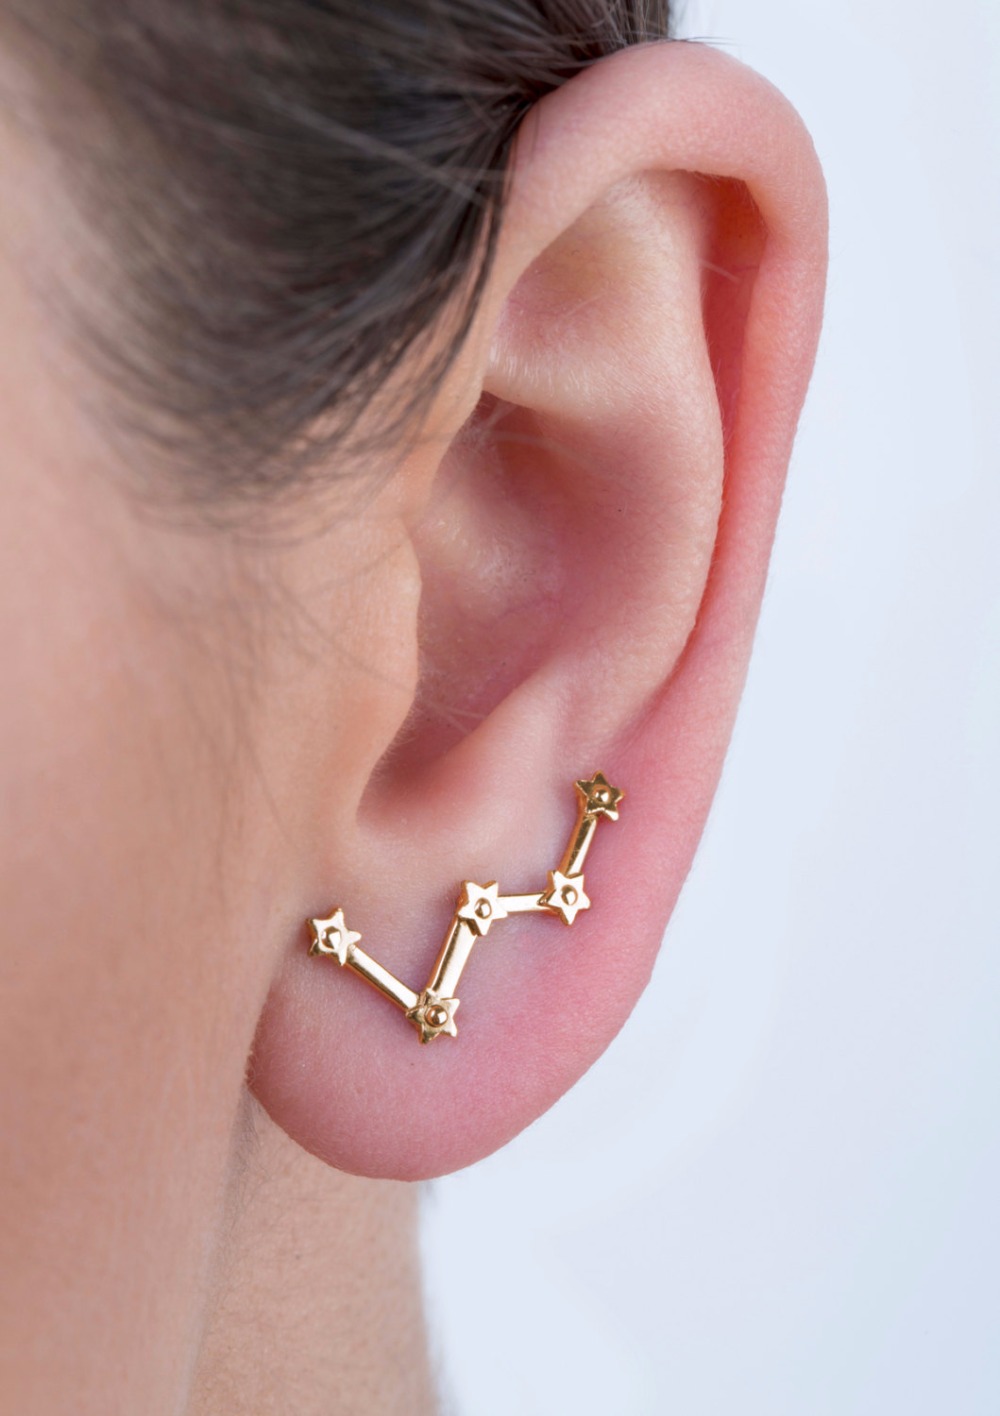 constellationearrings